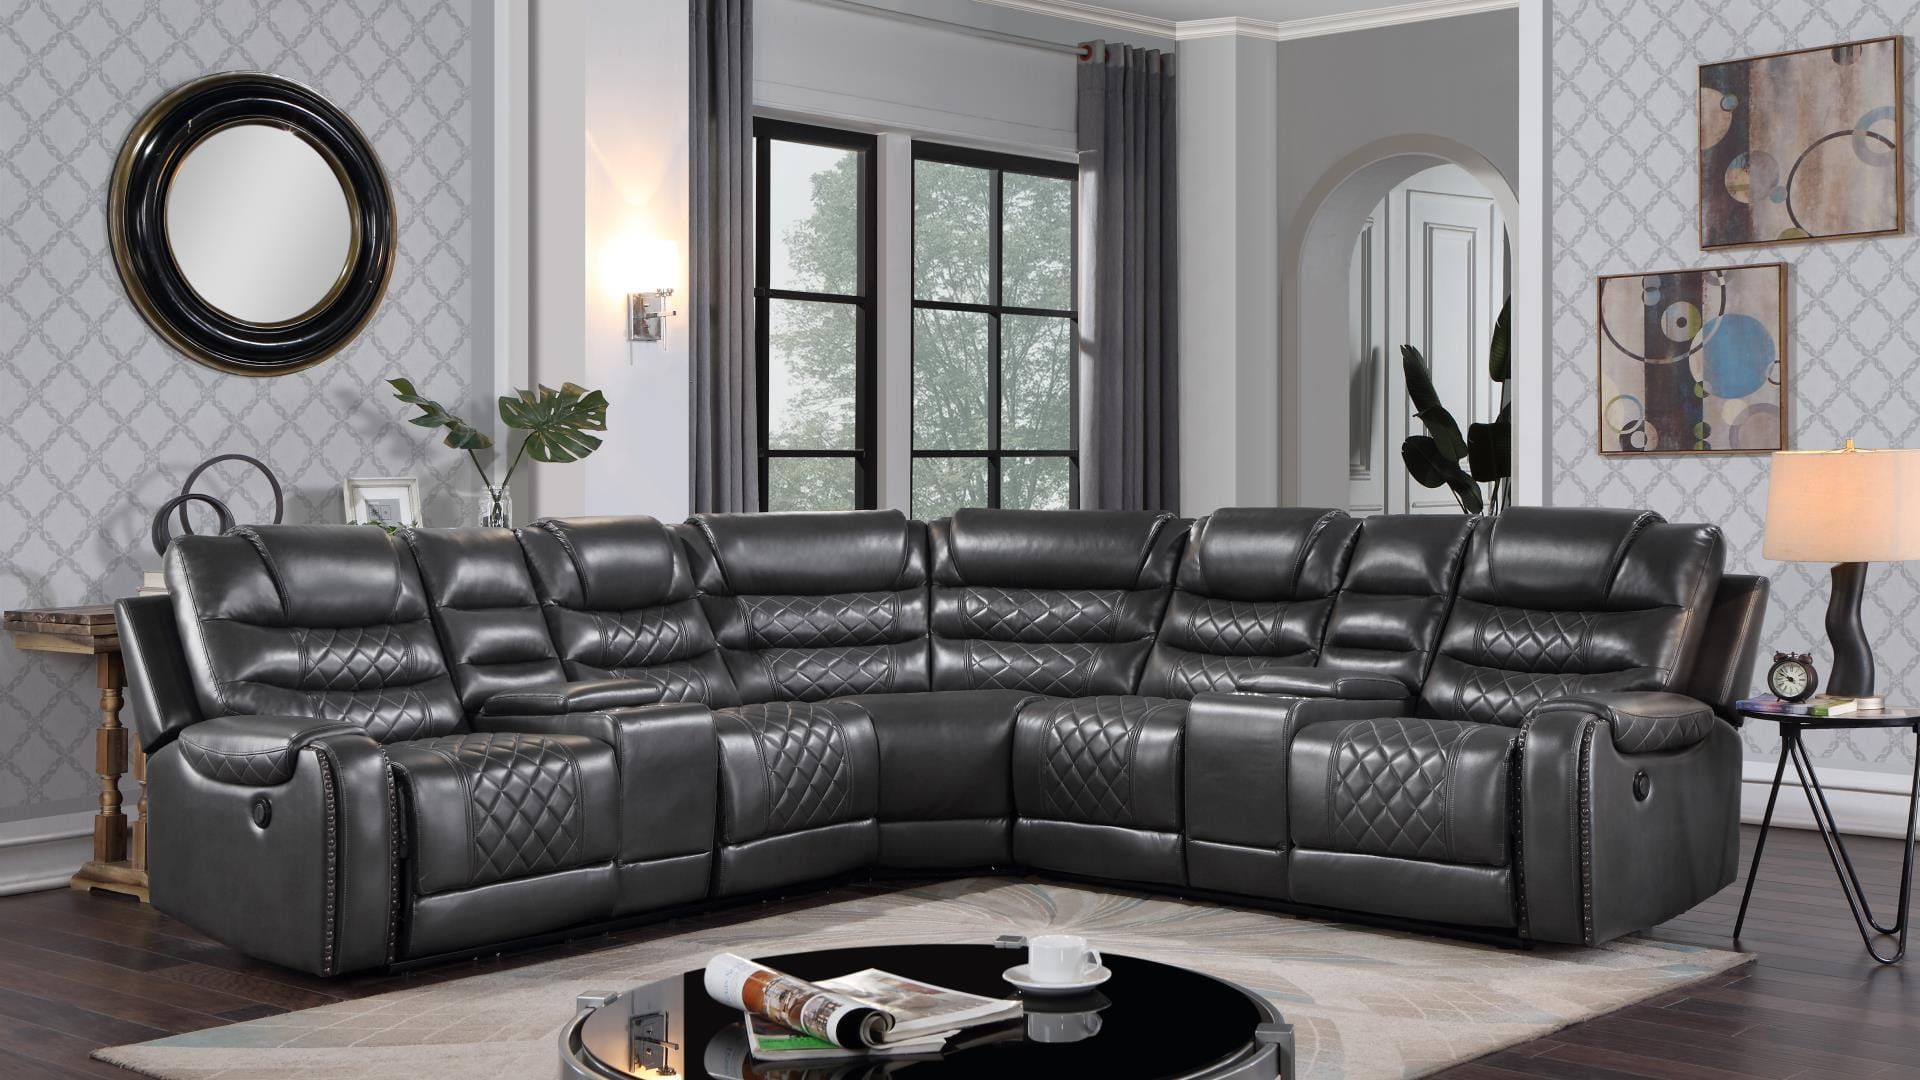 Tennesee Gray Faux Leather Sectional Sofagalaxy Furniture Intended For Faux Leather Sectional Sofa Sets (View 10 of 15)